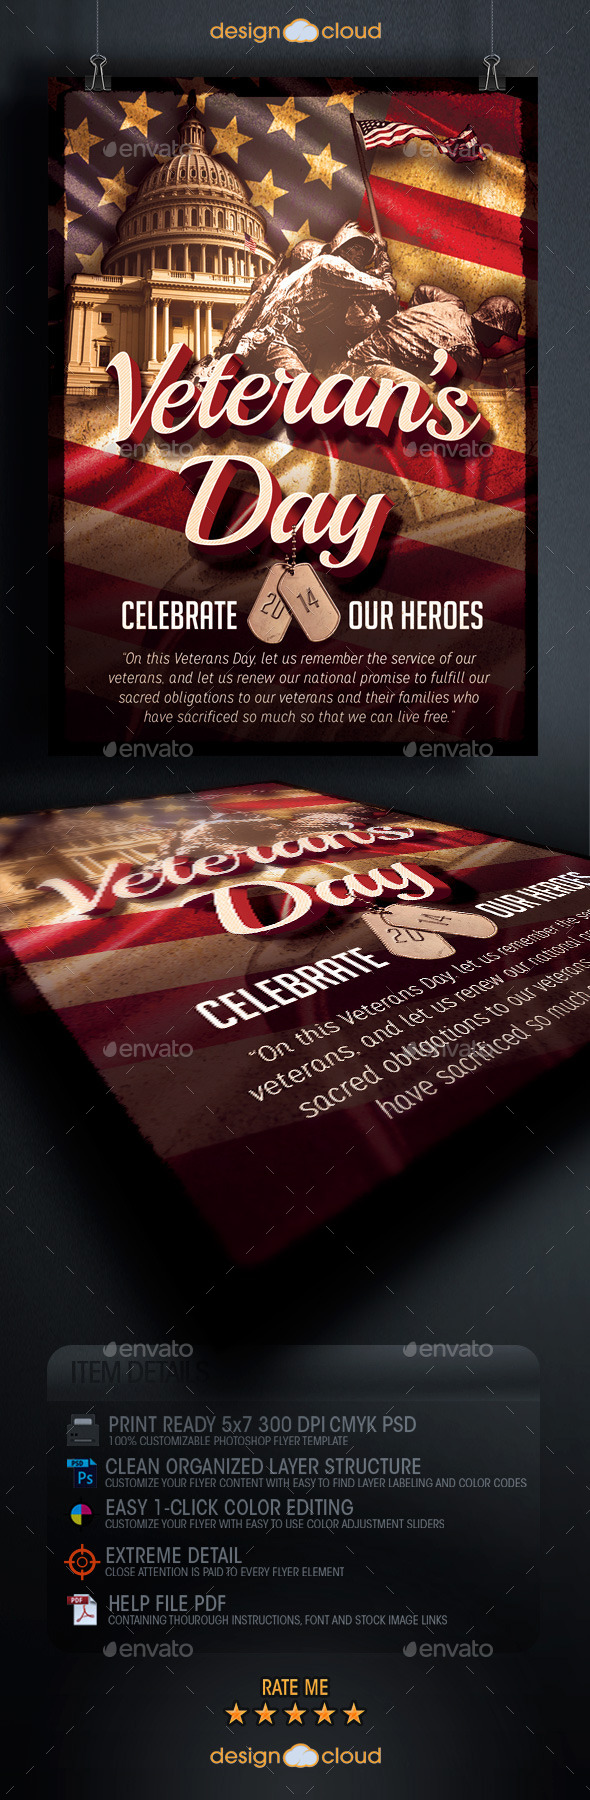 Veteran s Day Flyer Template By Design Cloud GraphicRiver